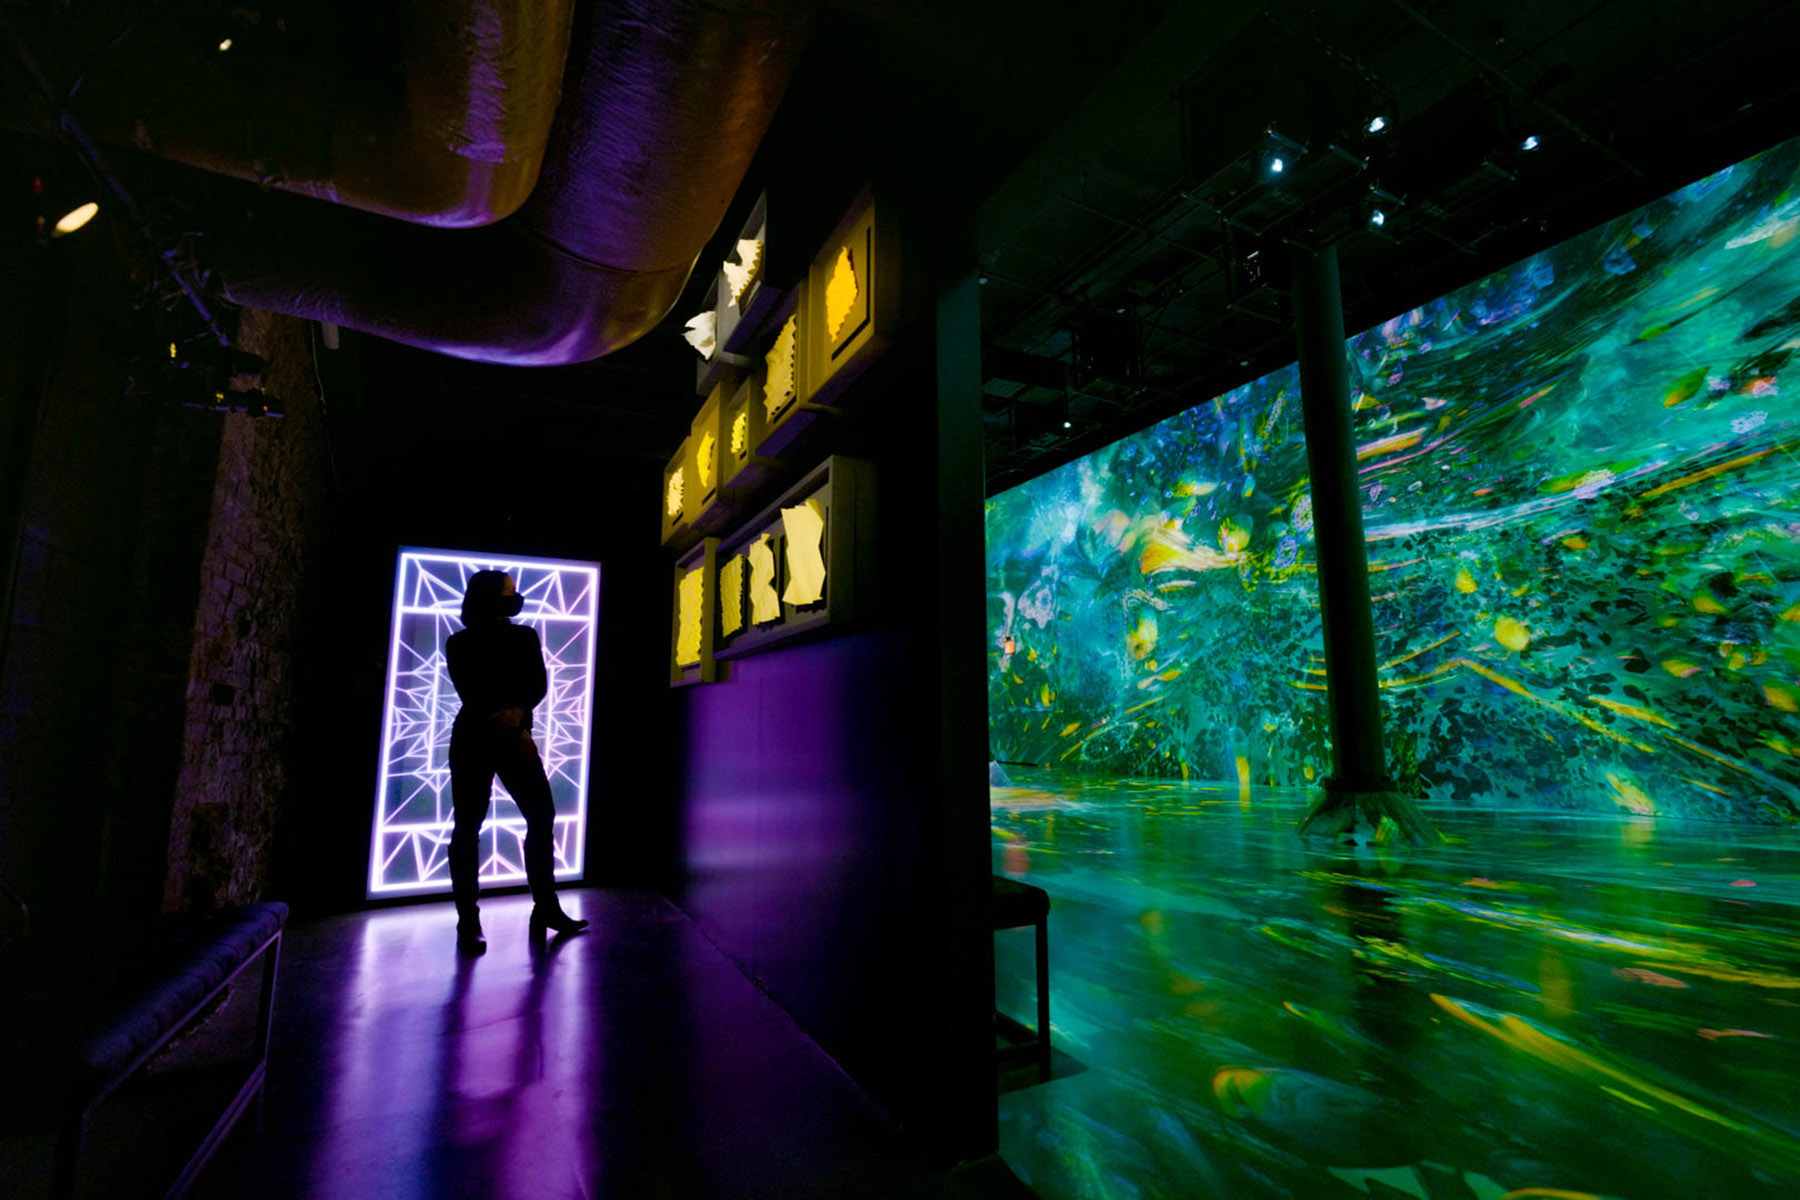 L-Acoustics sound system for new immersive exhibition at ARTECHOUSE, NYC